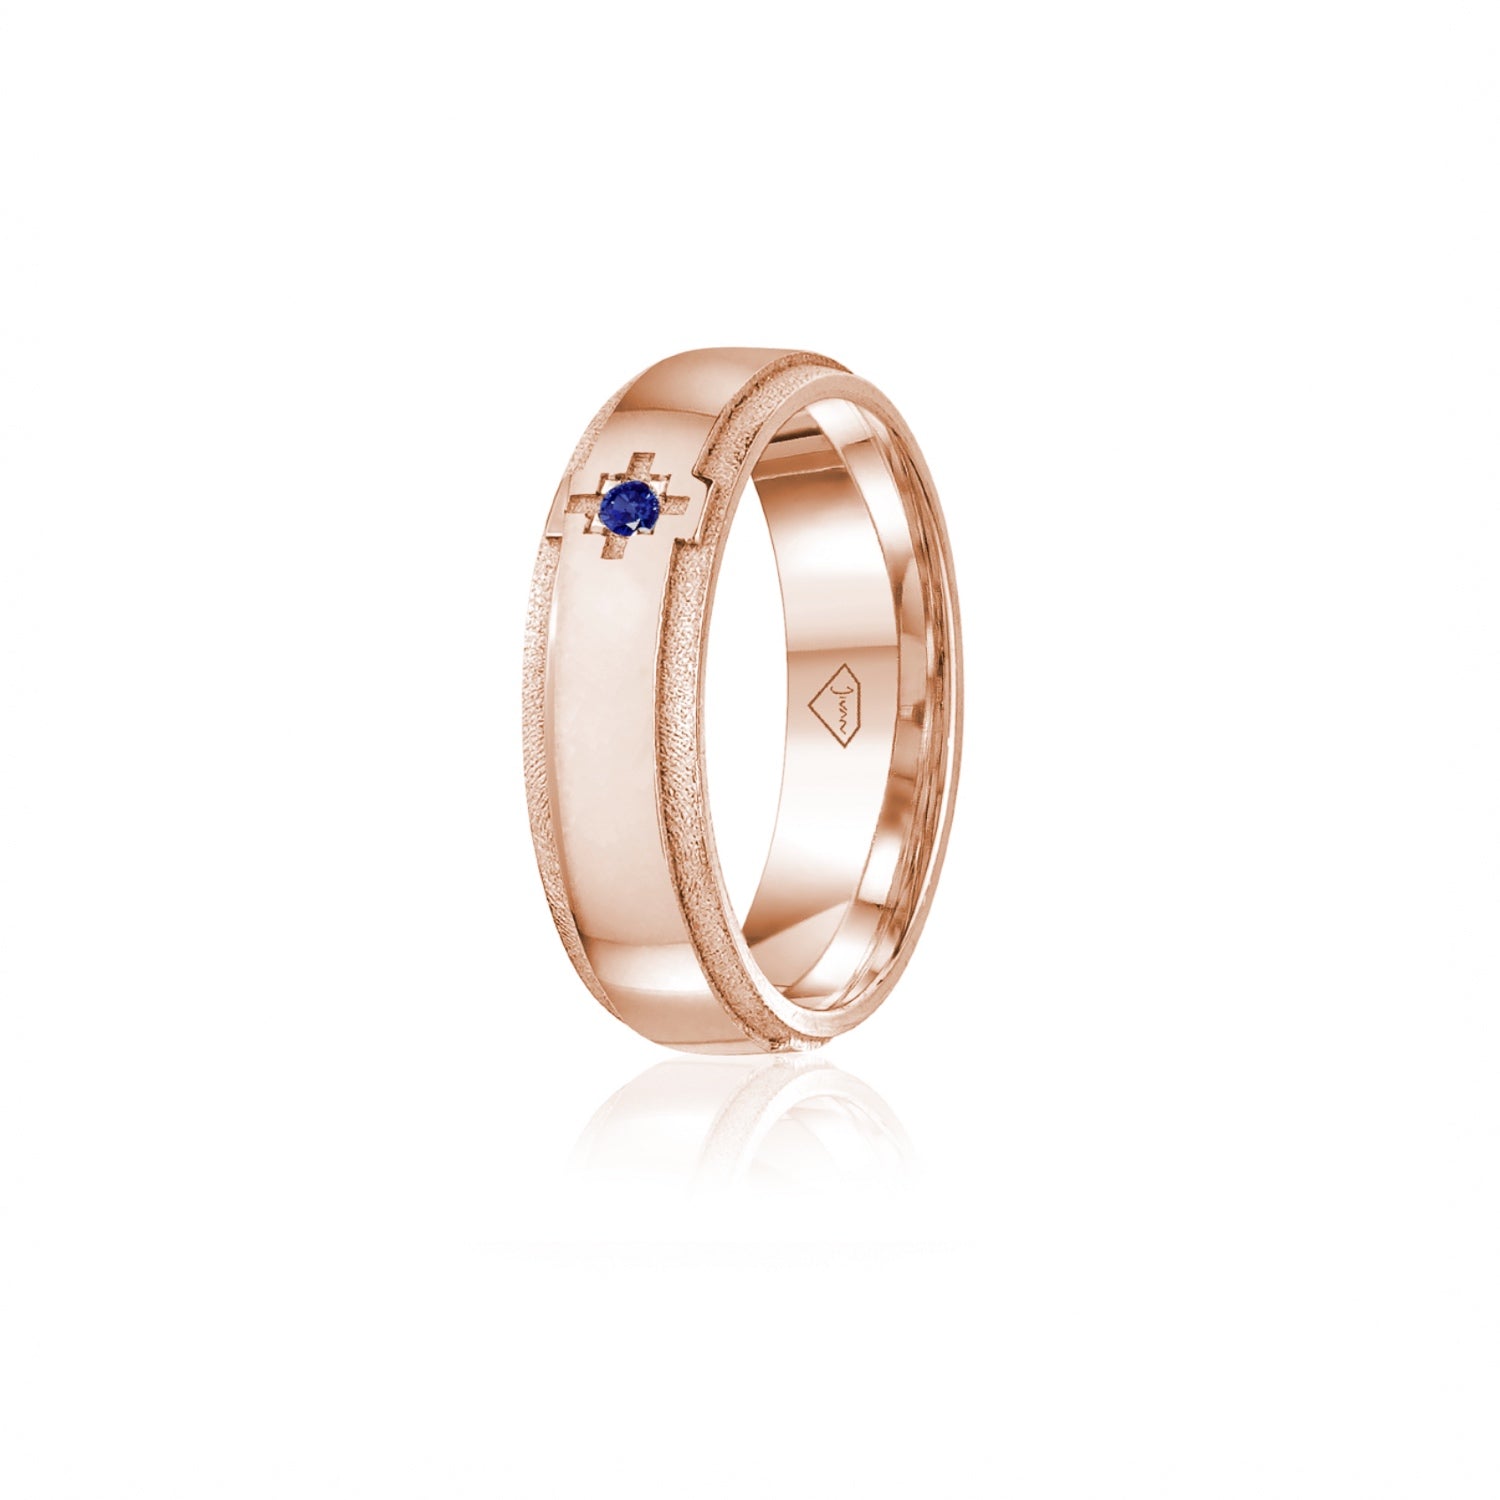 Sapphire Accent Polished Finish Bevelled Edge 8-9 mm Wedding Ring in Rose Gold